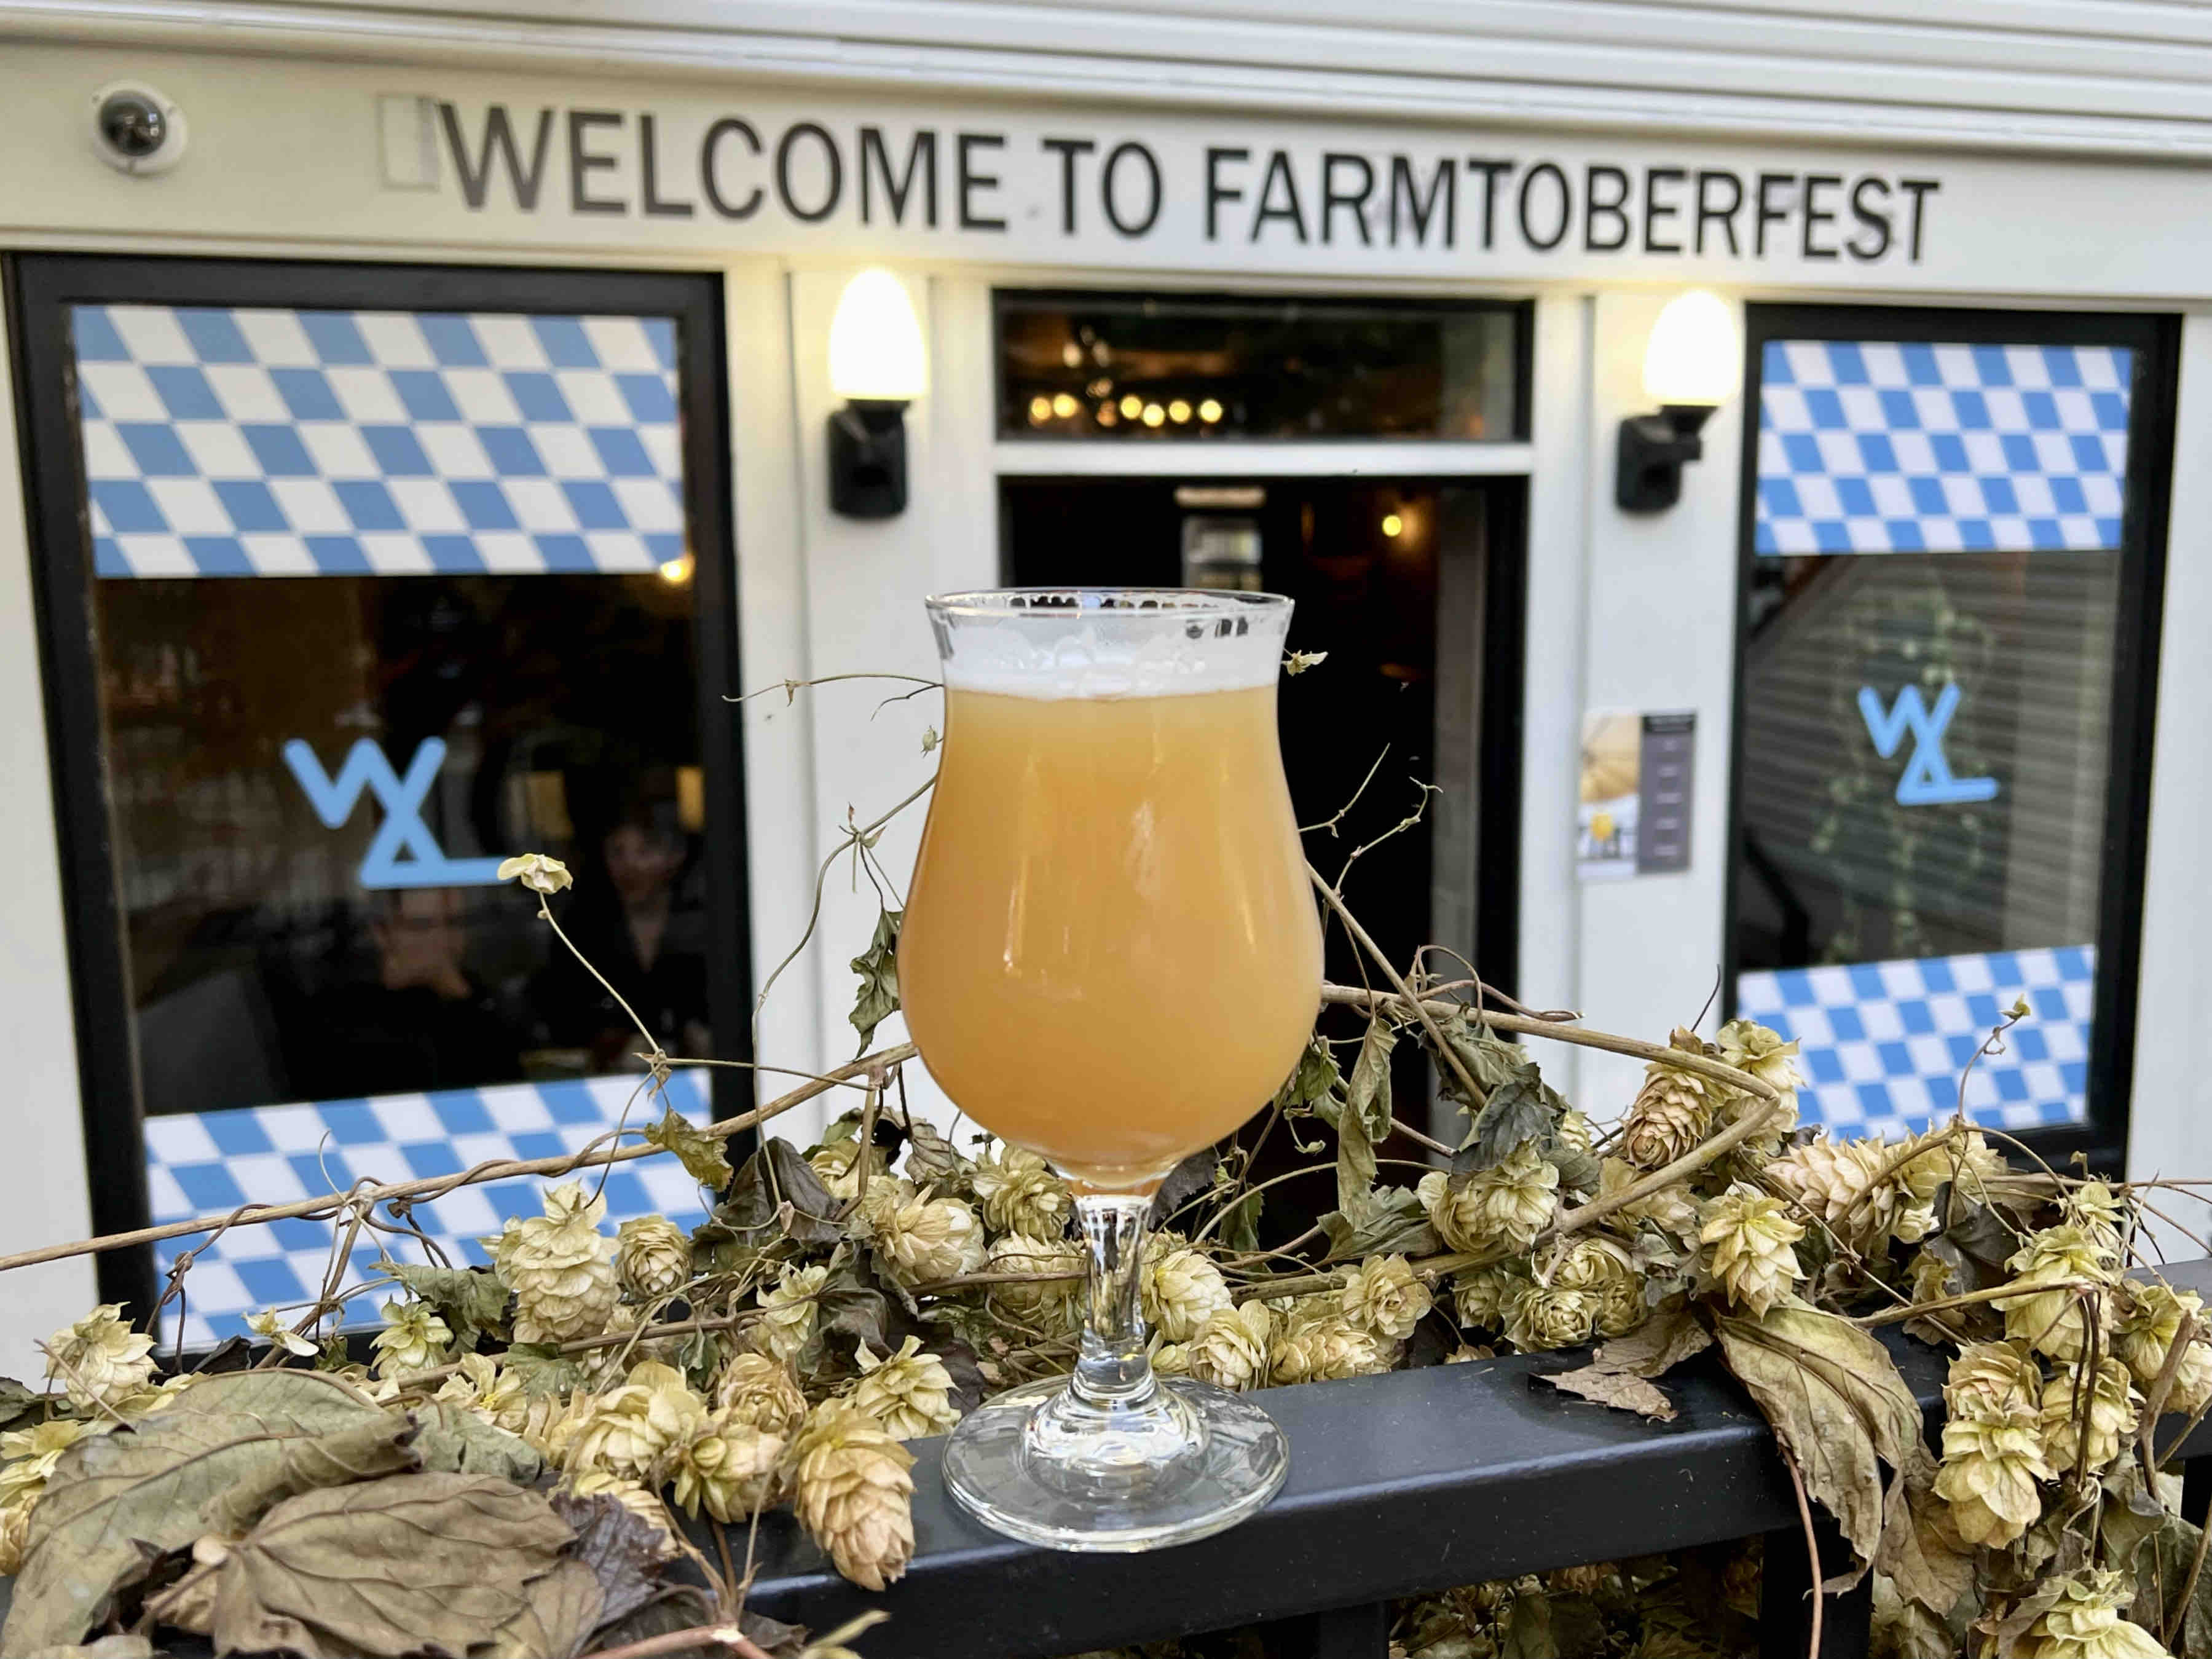 A Wolf of Wheat from Wolves & People Farmhouse Brewery at Function PDX as it hosts Farmtoberfest during the month of October 2021.